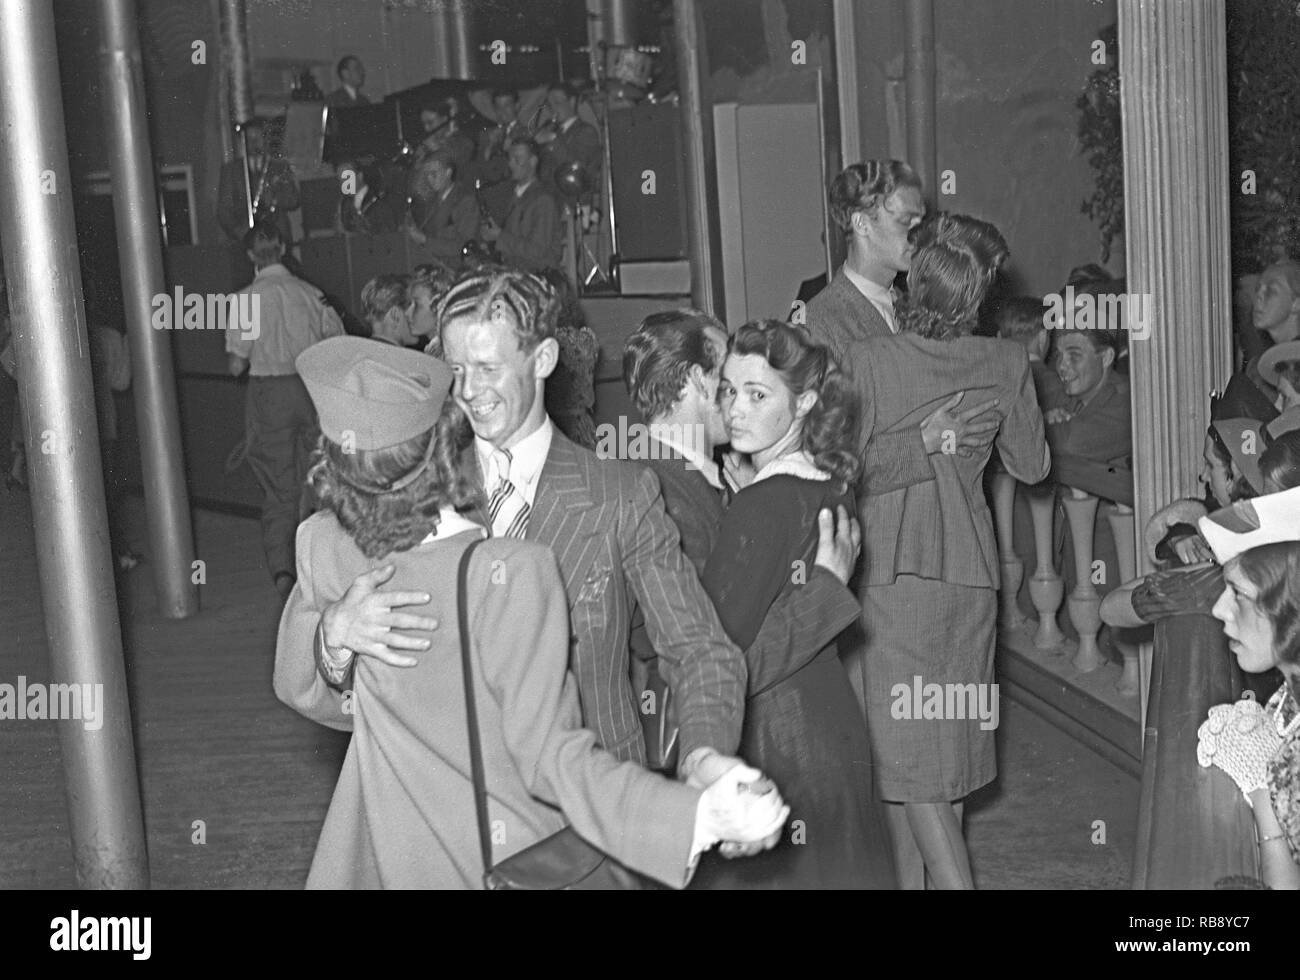 Dancing in the 1940s. Young couples at a dance event holding each other close moving to the music. In the foreground recordholding high-jumper Åke Ödmark pictured at Gröna Lund tivoli.  Photo Kristoffersson Ref 153-11. Sweden July 1940. Stock Photo